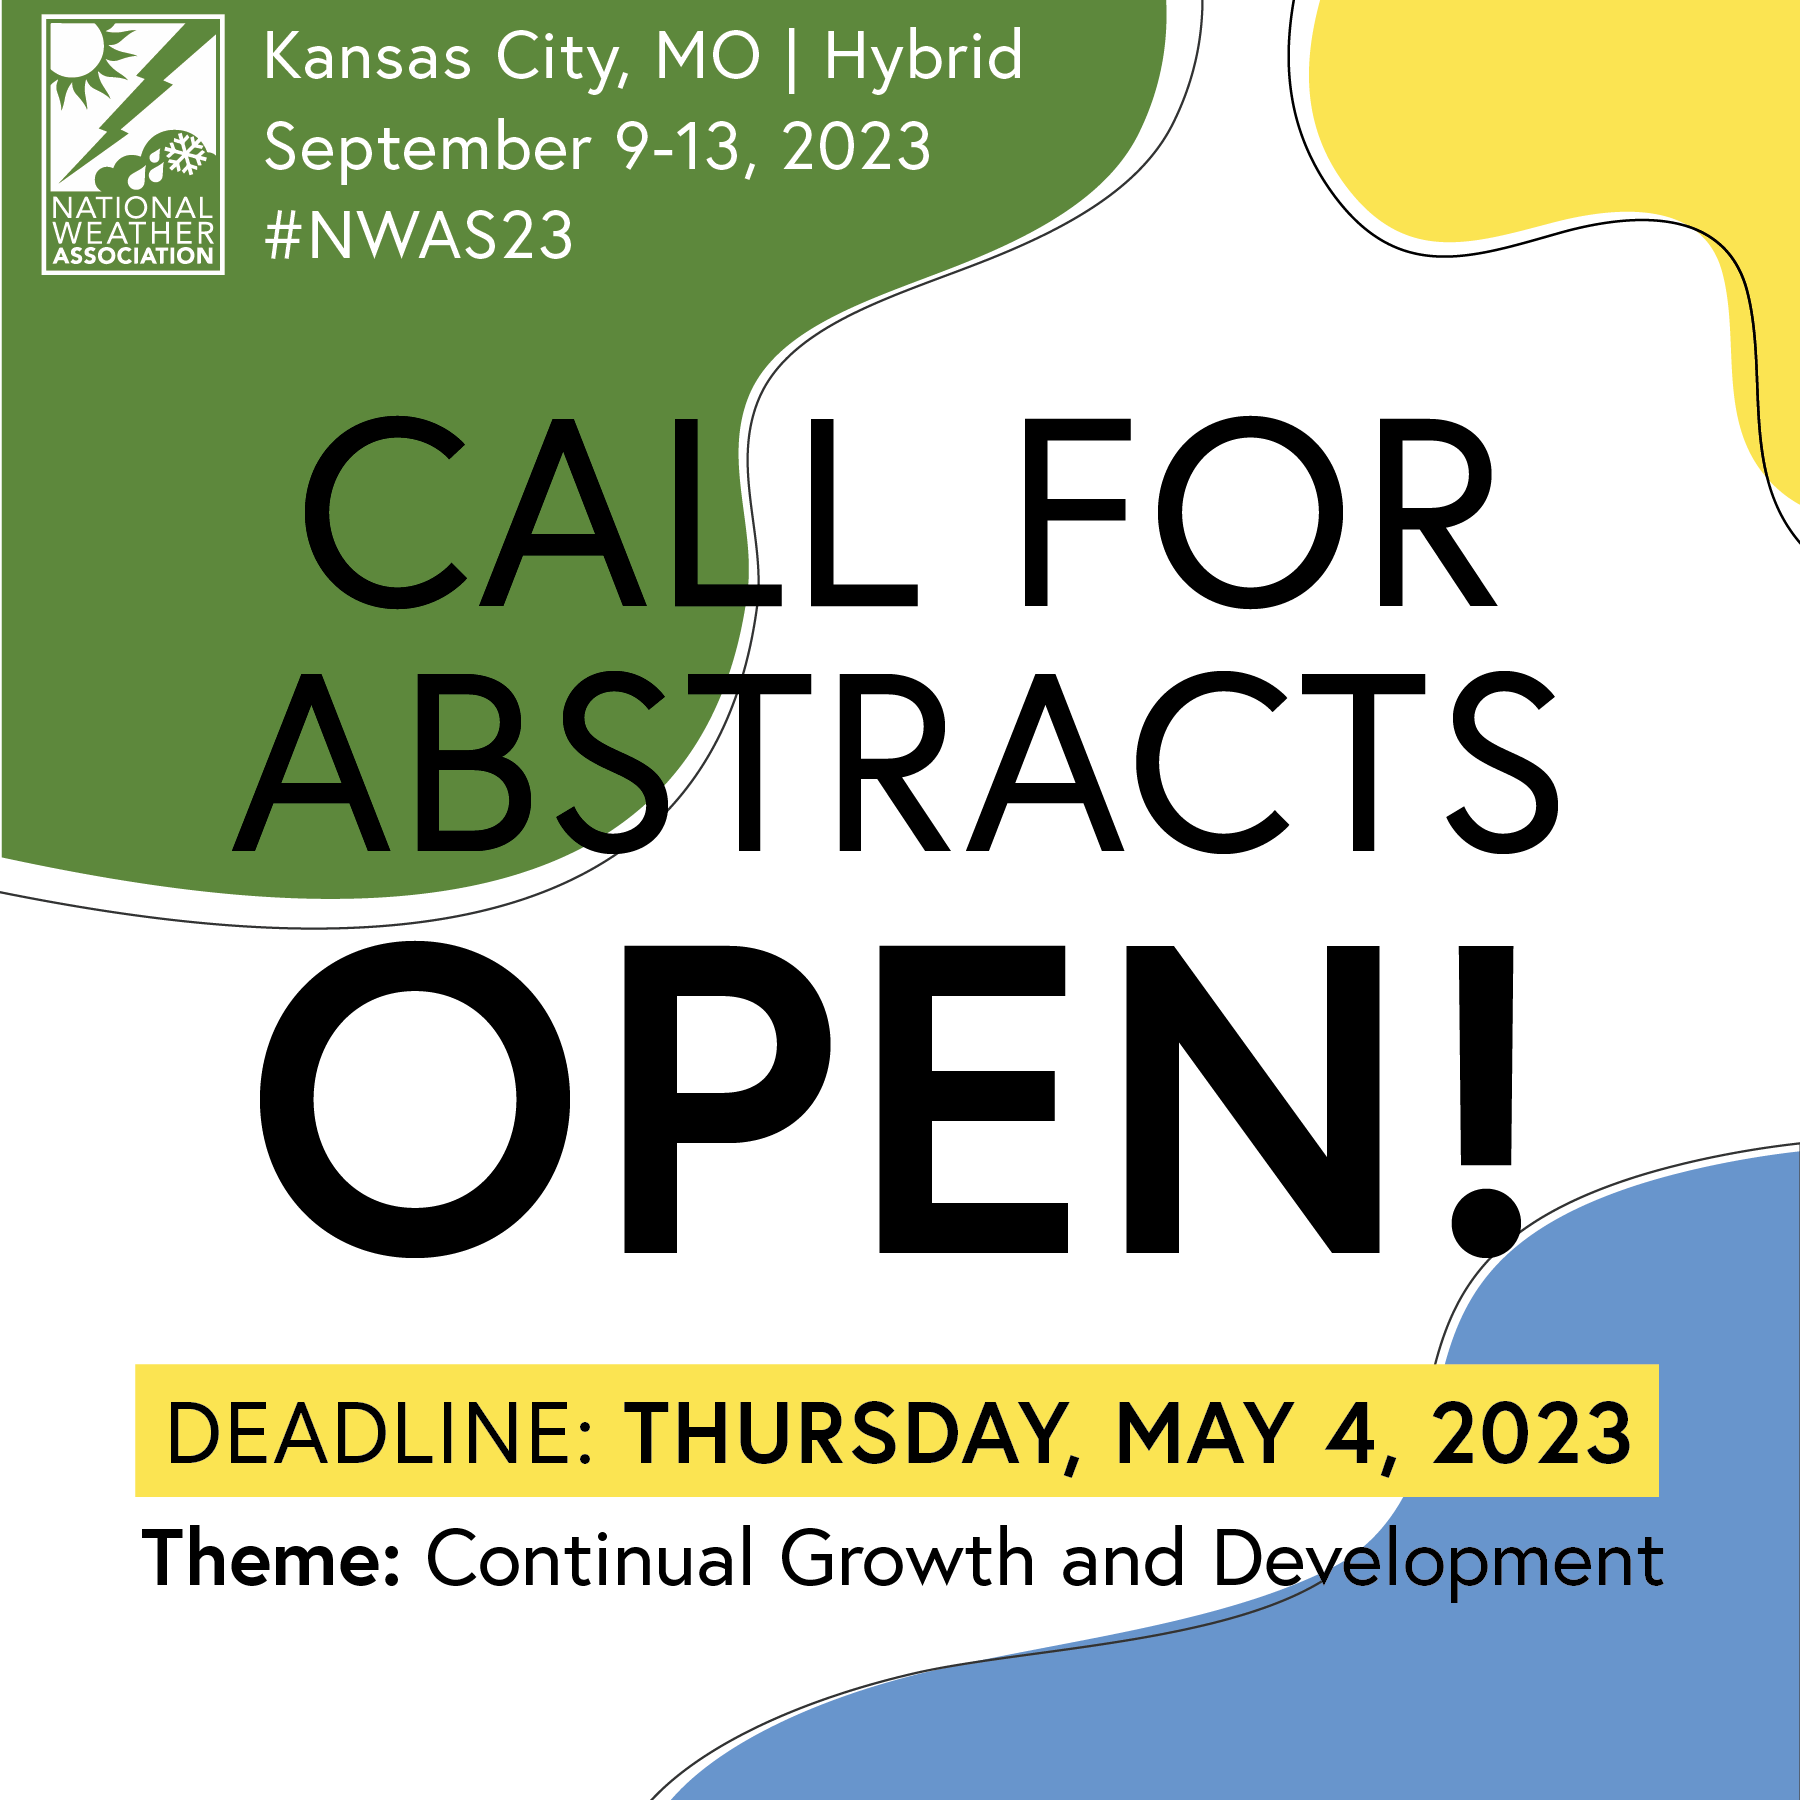 Call for Abstracts Open! Deadline is Thursday May 4, 2023. Theme is Continual Growth and Development. 